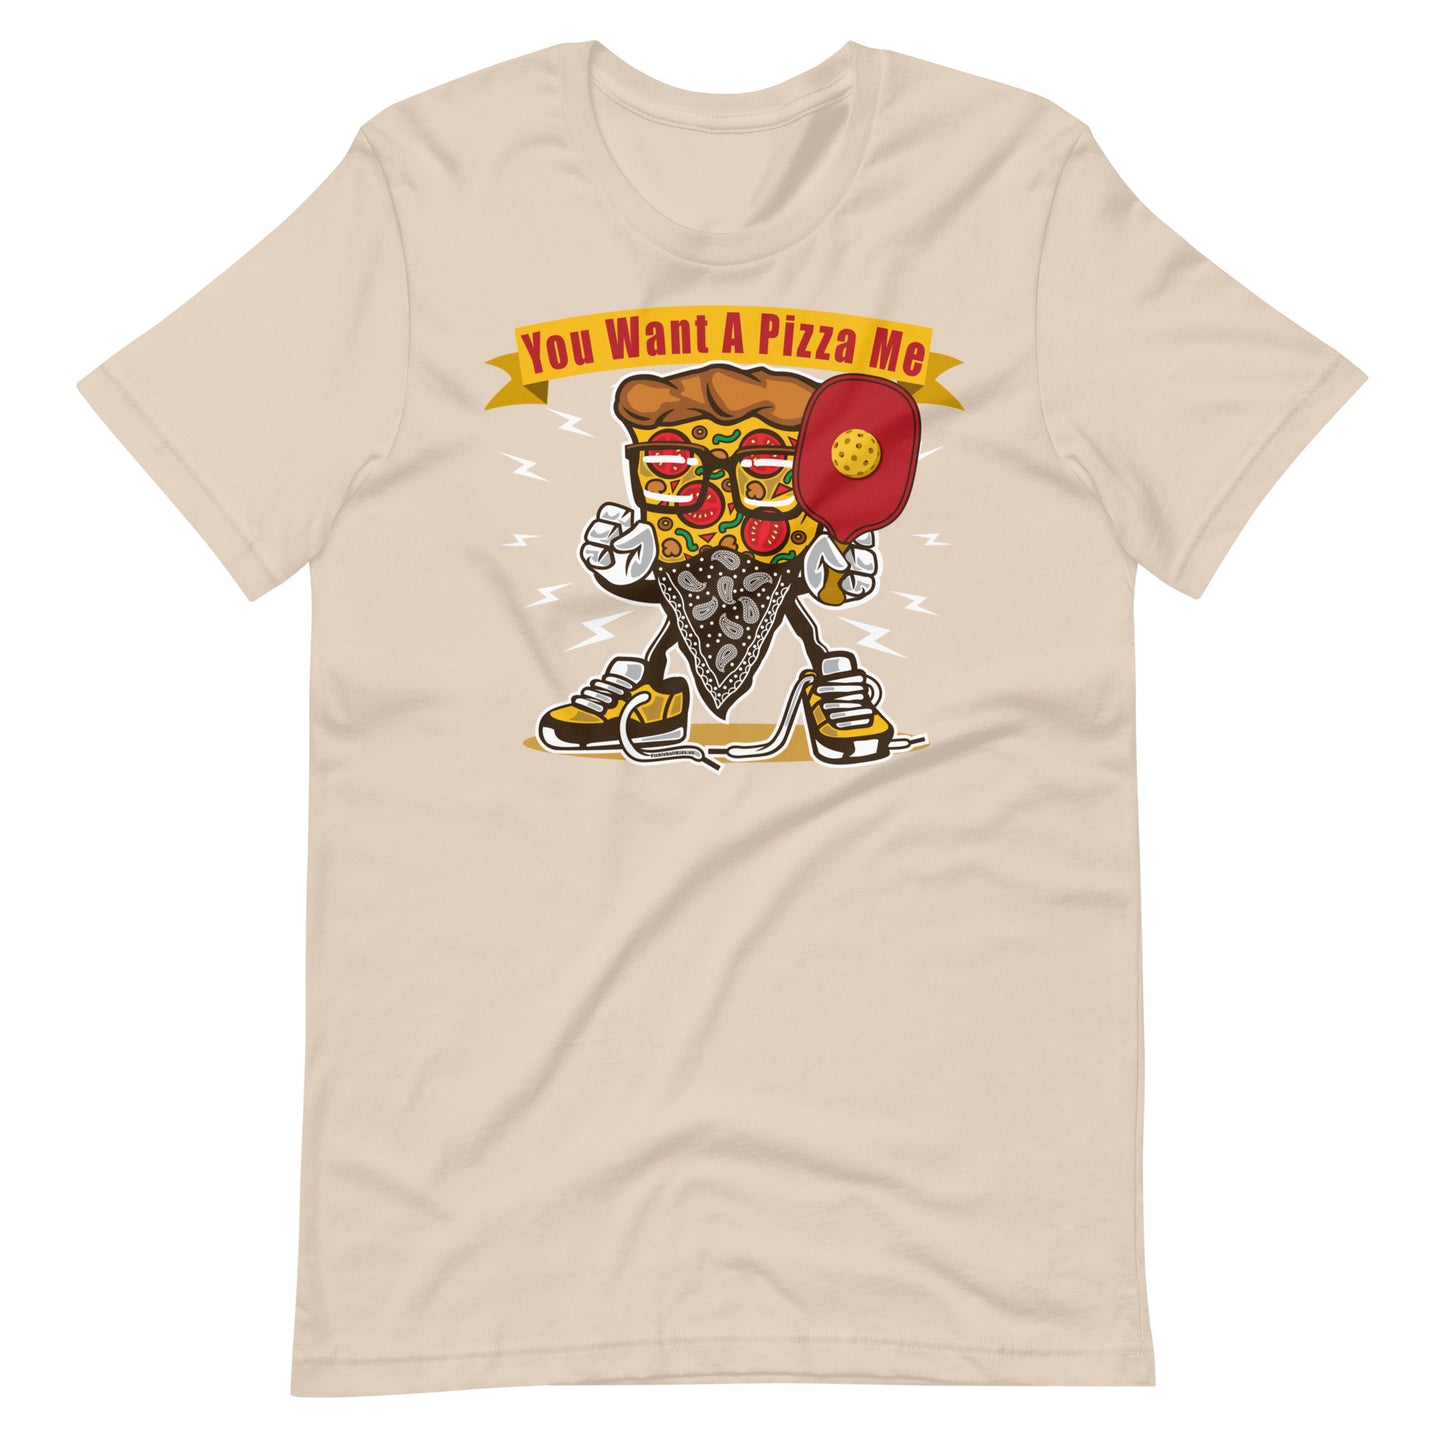 Retro-Vintage Fun Pickleball "You Want A Pizza Of Me" Unisex T-Shirt